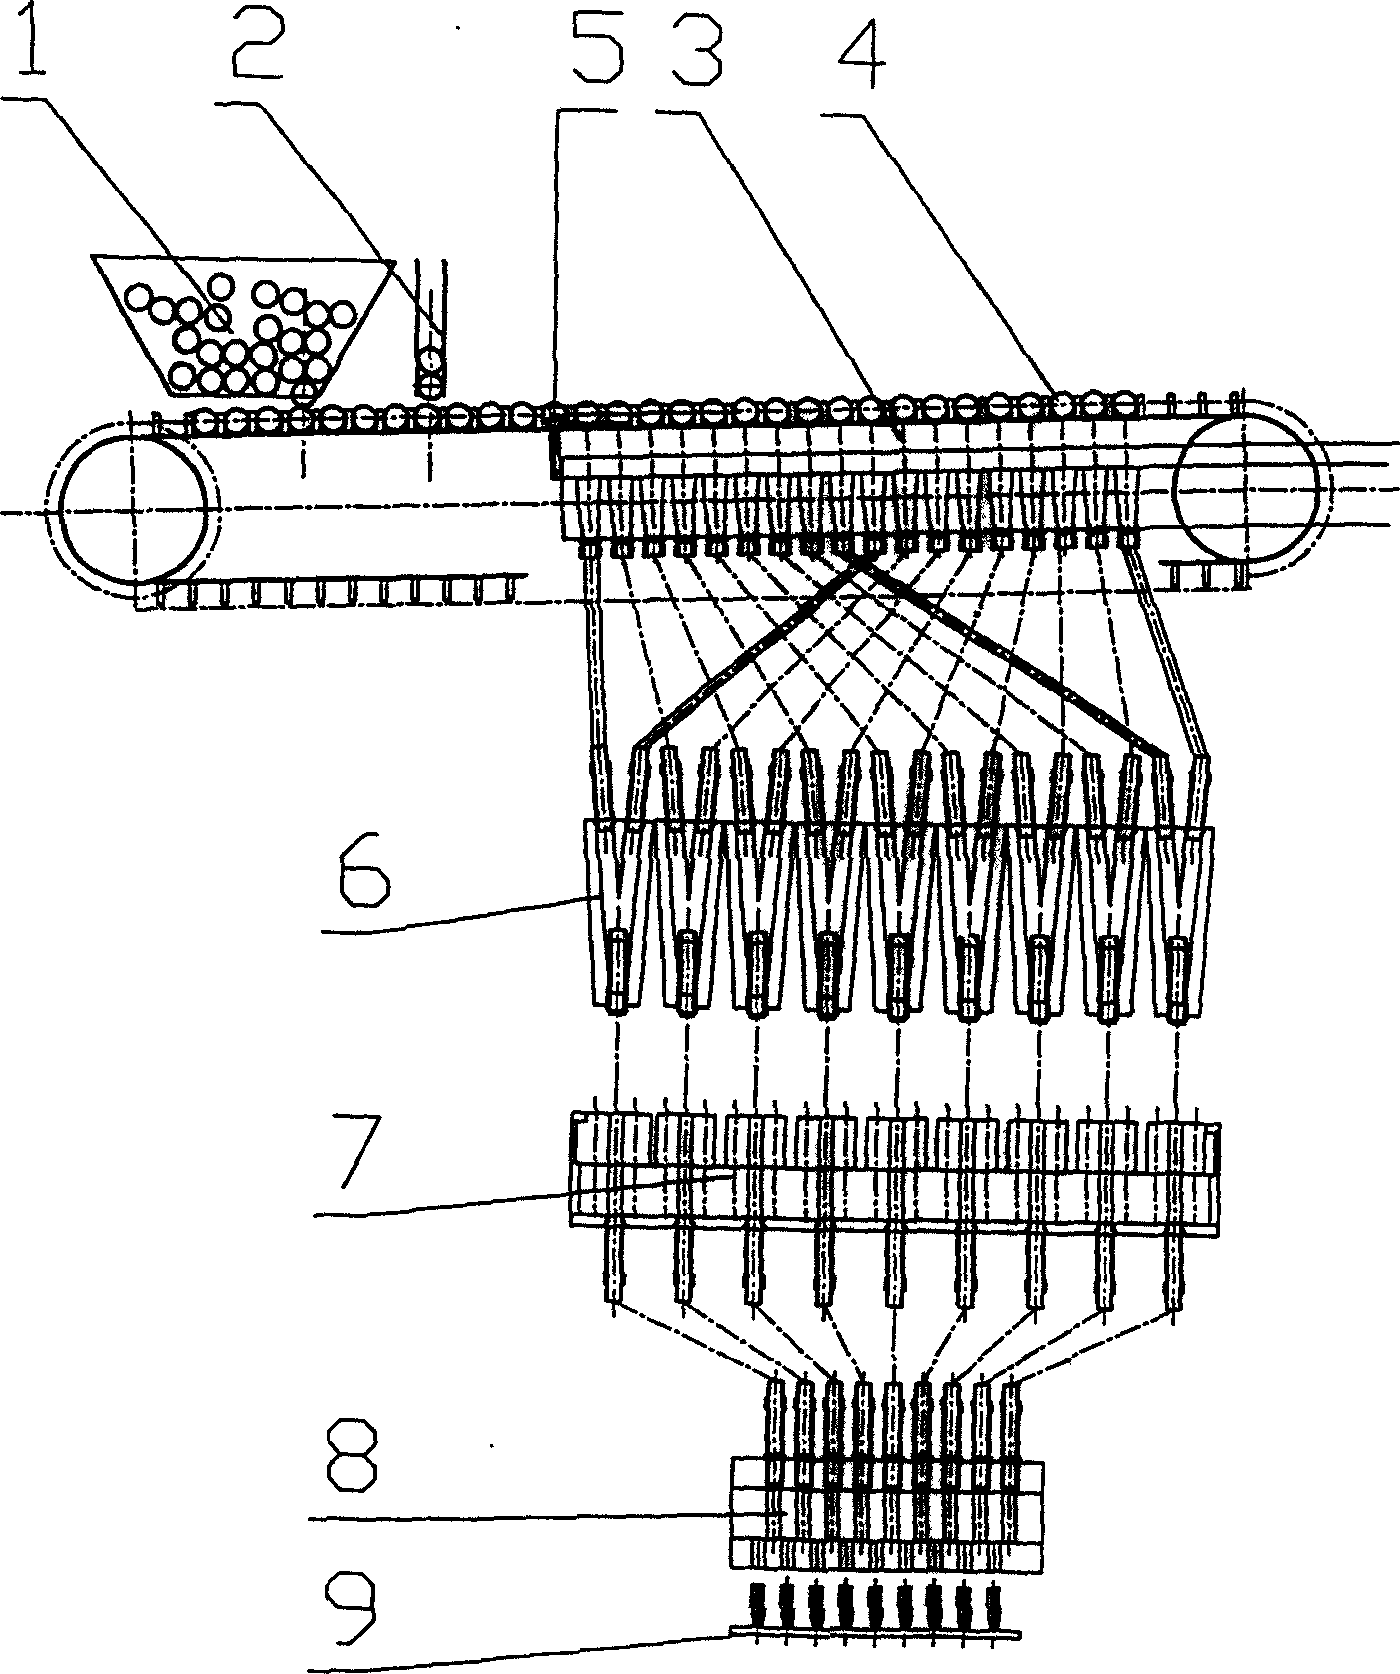 Apparatus for automatically arranging casings and loading casings into hanger